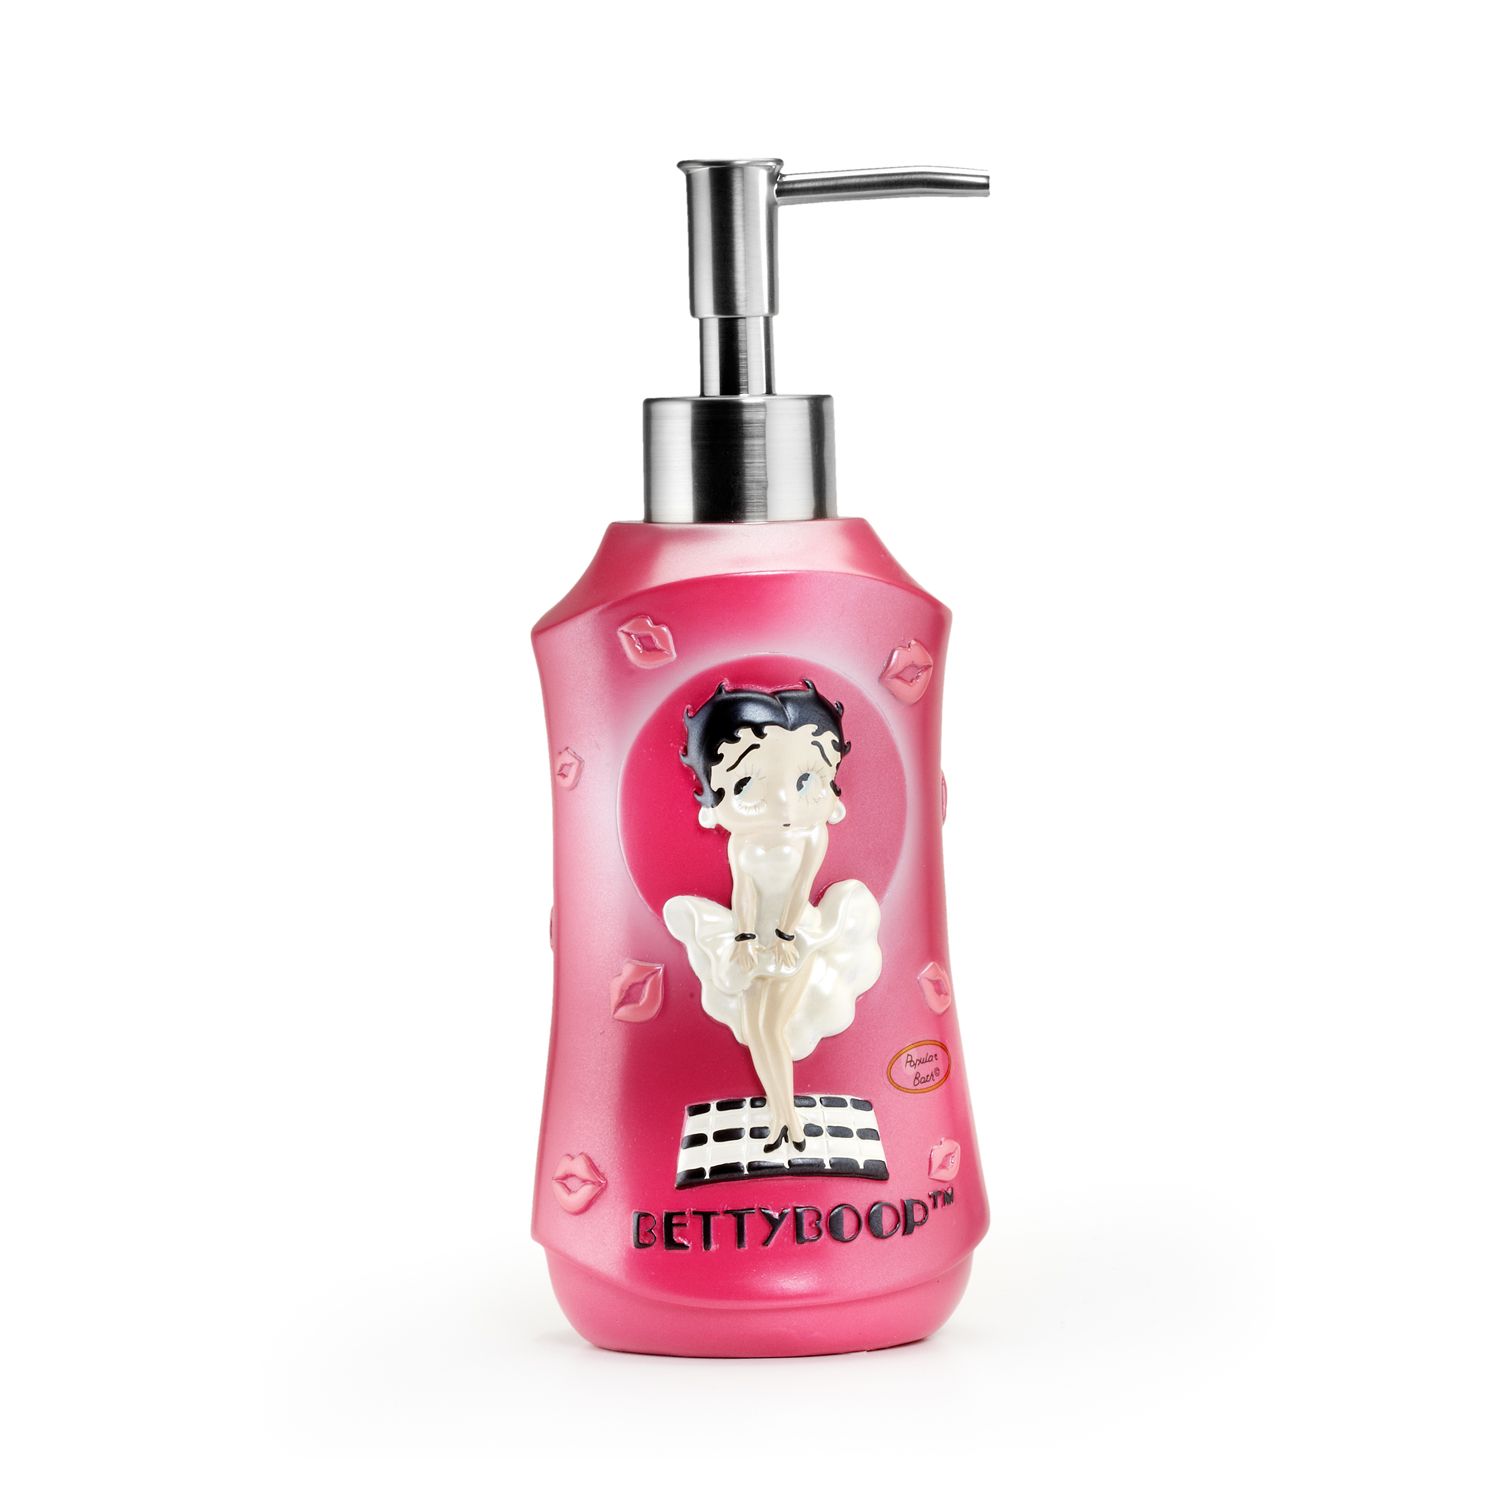 Popular Bath Products BETTY BOOP"PINK"LOTION PUMP"